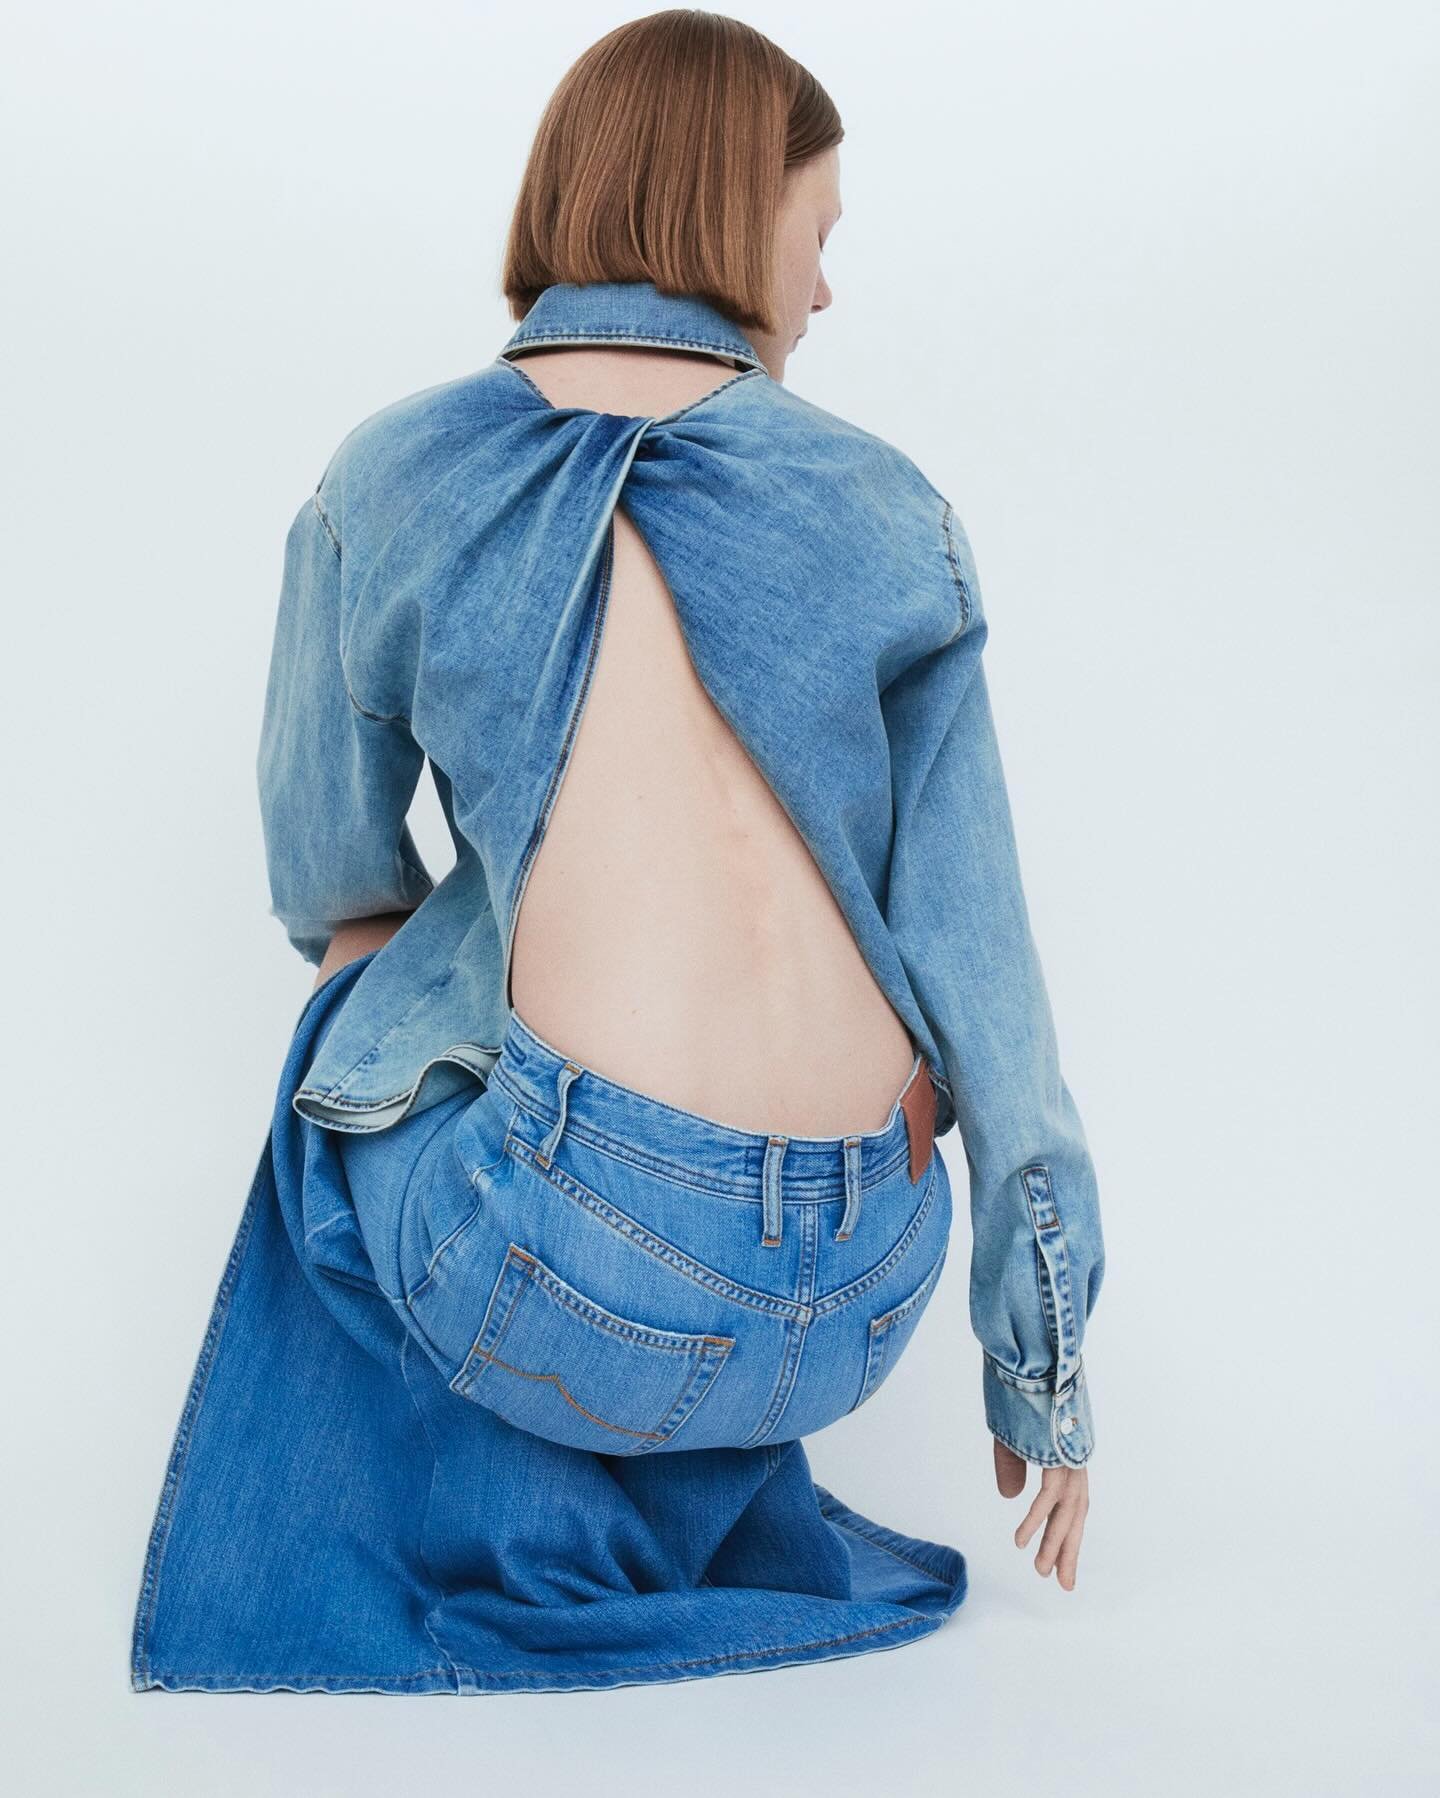 Subtle feminine touches on everyday denim. 💙

@jacobcohen_official &rsquo;s Spring Summer women&rsquo;s collection features open back shirts, dresses enriched with fabric weaves and delicate sleeve openings, adding a touch of sophistication and sens